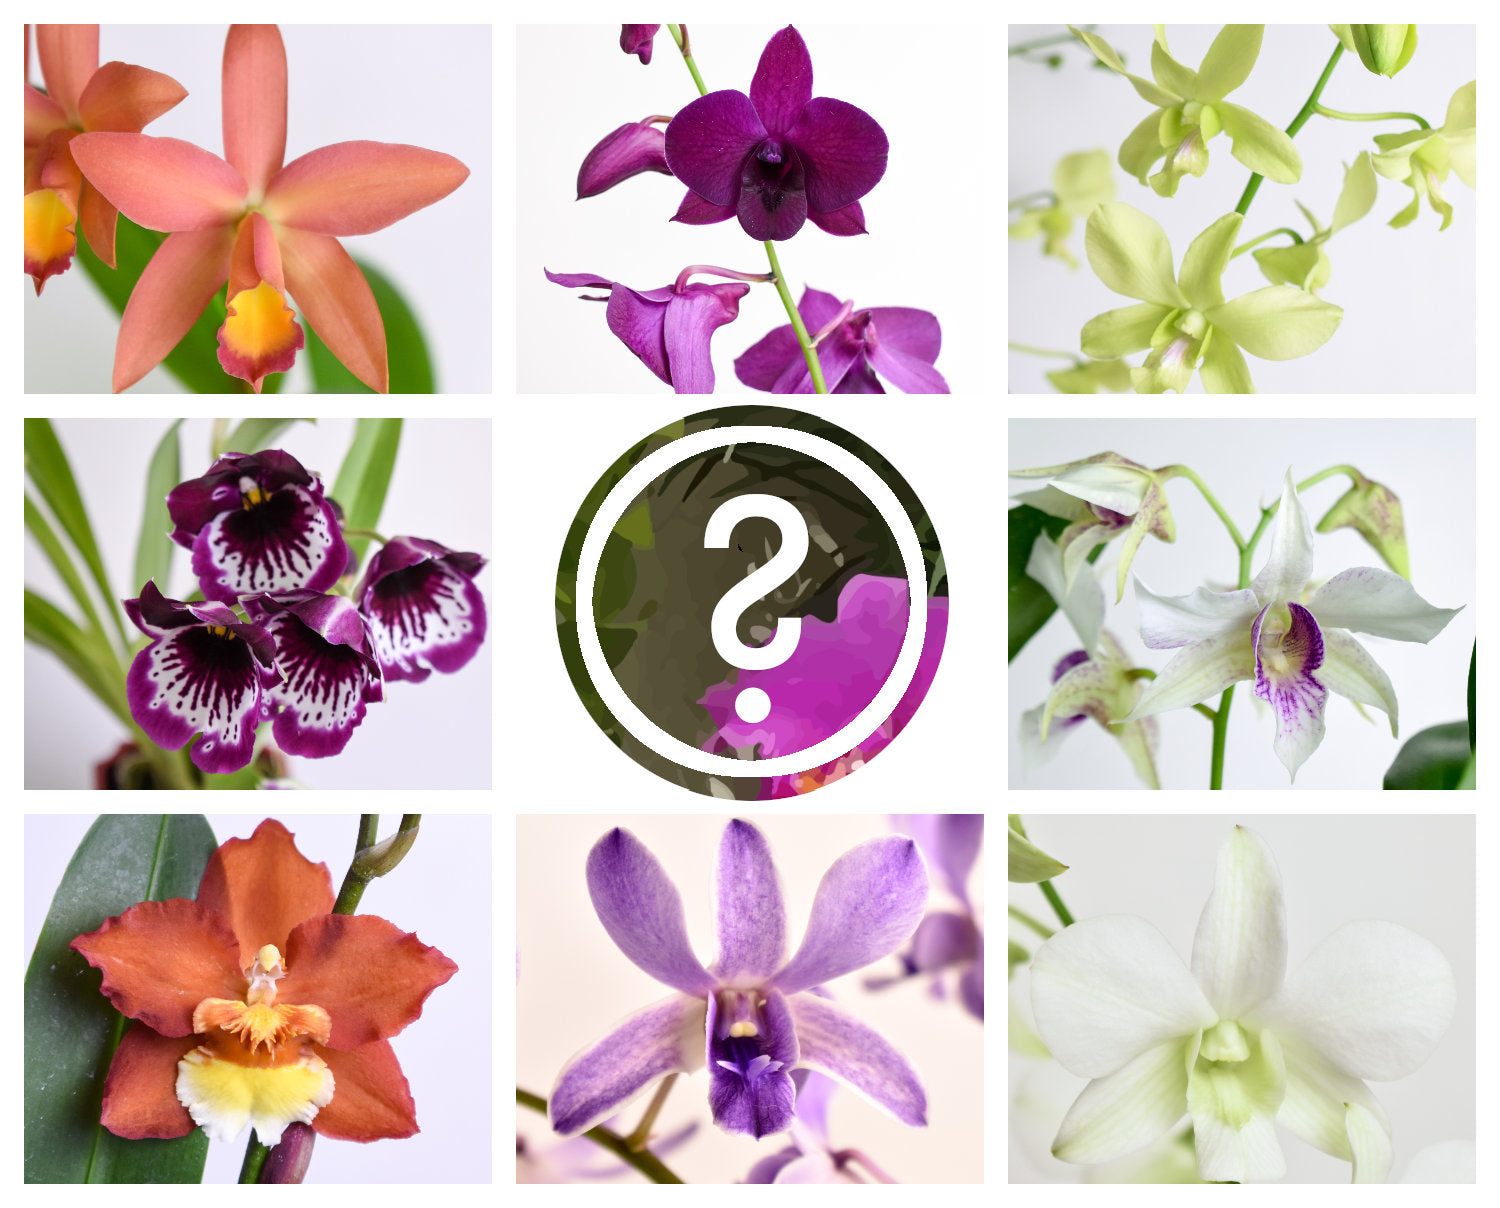 Orchids Mystery Box - 3 Blooming Orchid Plants